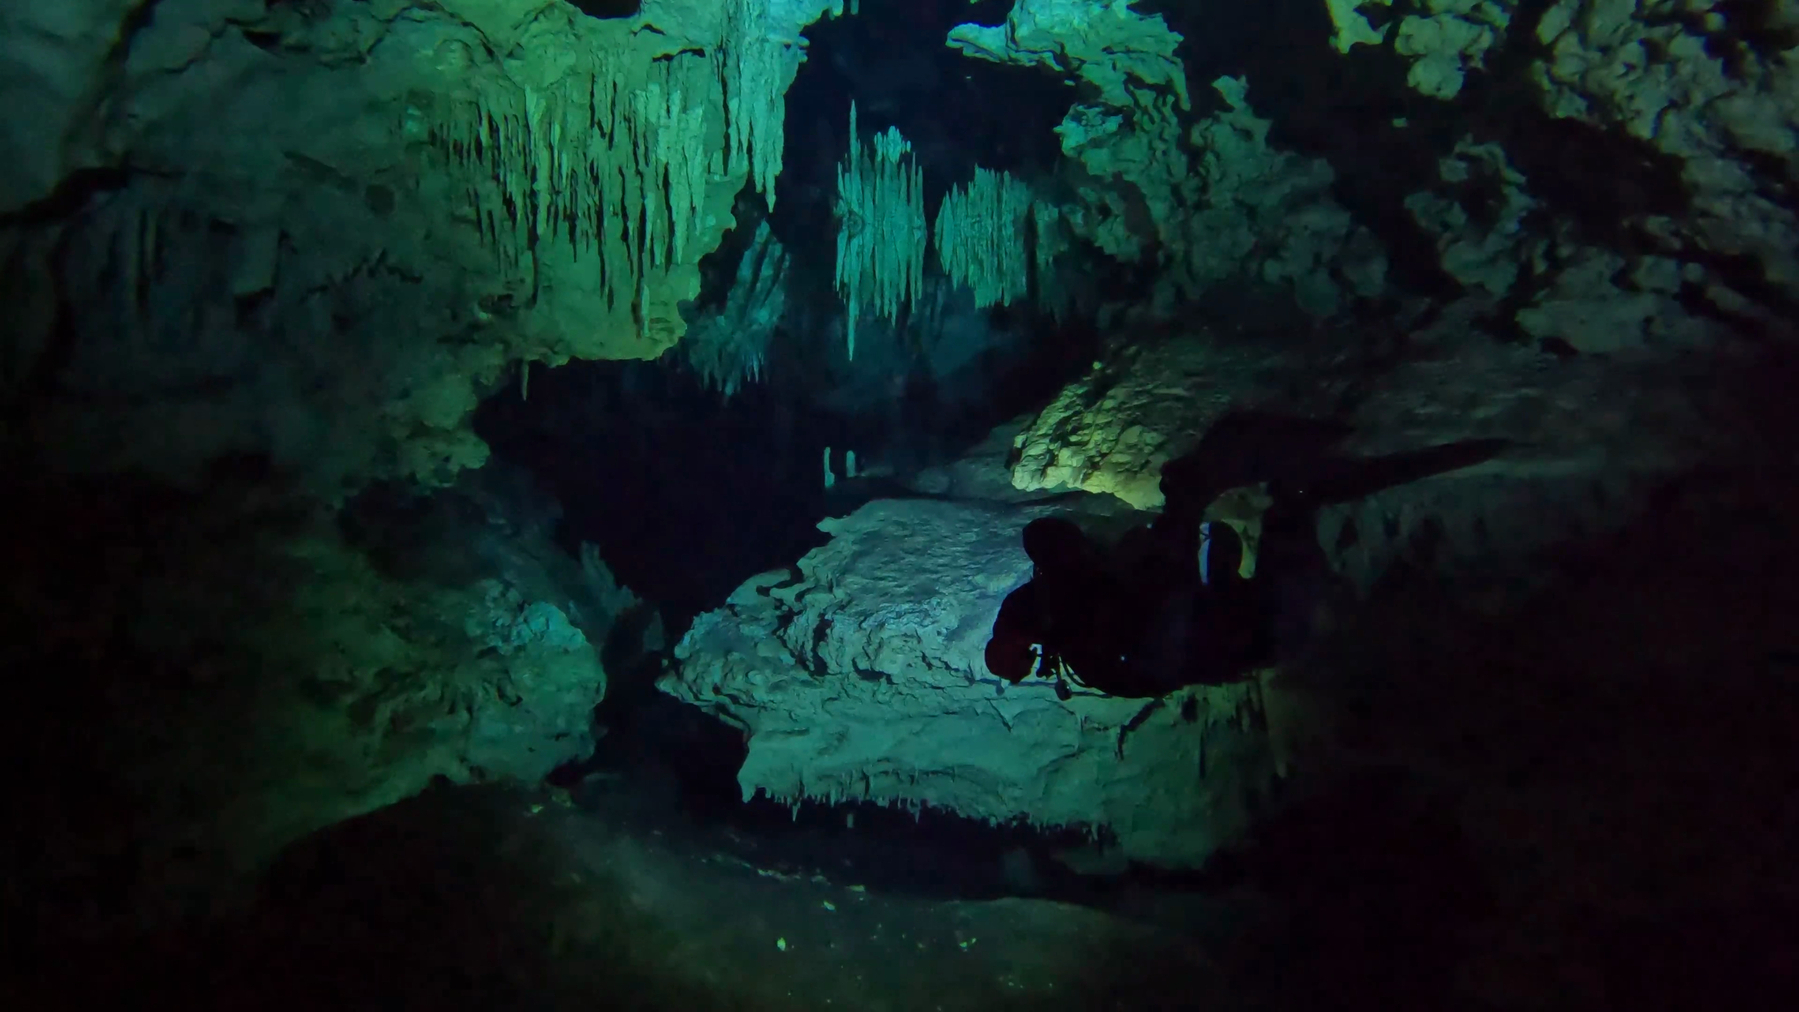 The silouhette of a diver against the brightly lit cave walls and myriad delicate speleothems outlining an underwater cave tunnel.